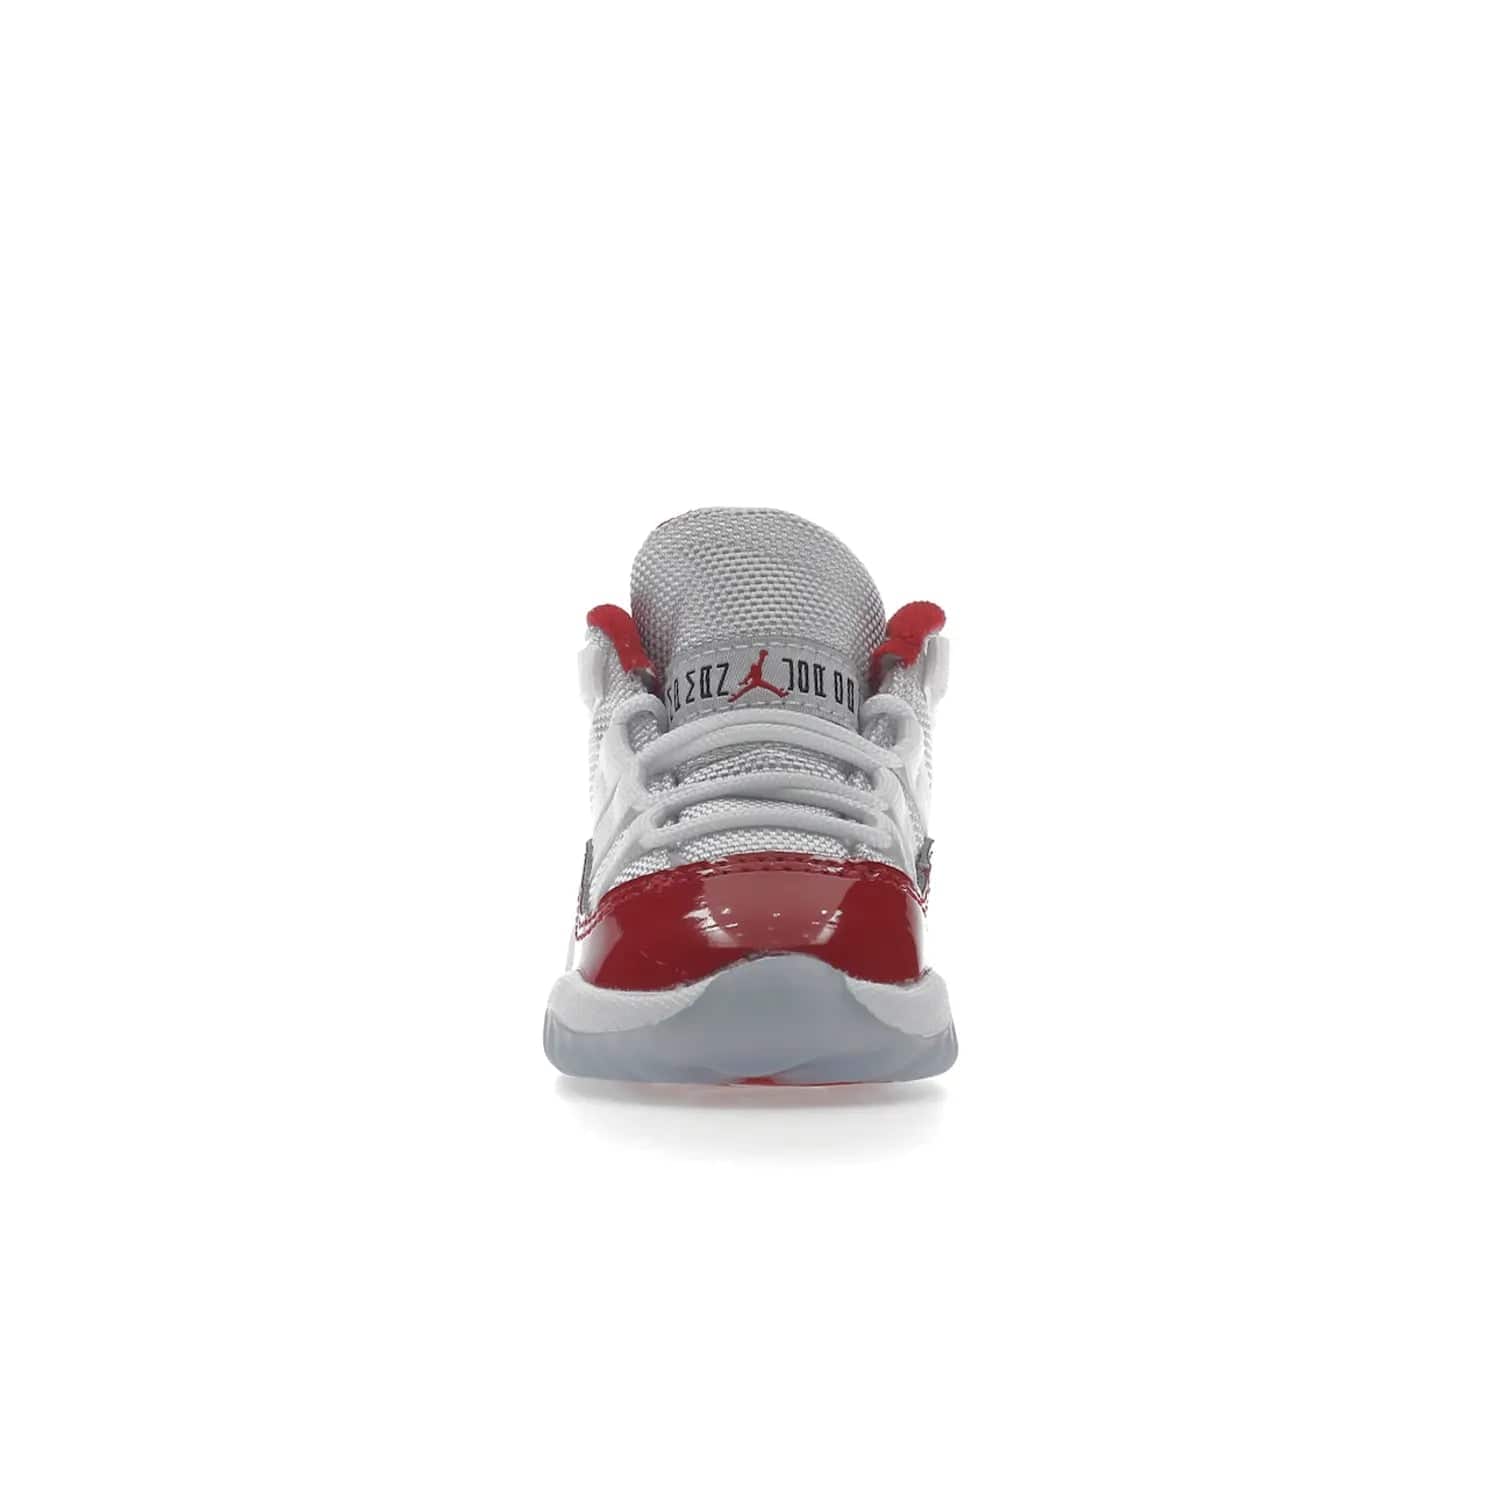 Jordan 11 Retro Cherry (2022) (TD) - Image 10 - Only at www.BallersClubKickz.com - Timeless classic. Air Jordan 11 Retro Cherry 2022 TD combines mesh, leather & suede for a unique look. White upper with varsity red suede. Jumpman logo on collar & tongue. Available Dec 10th, priced at $80.